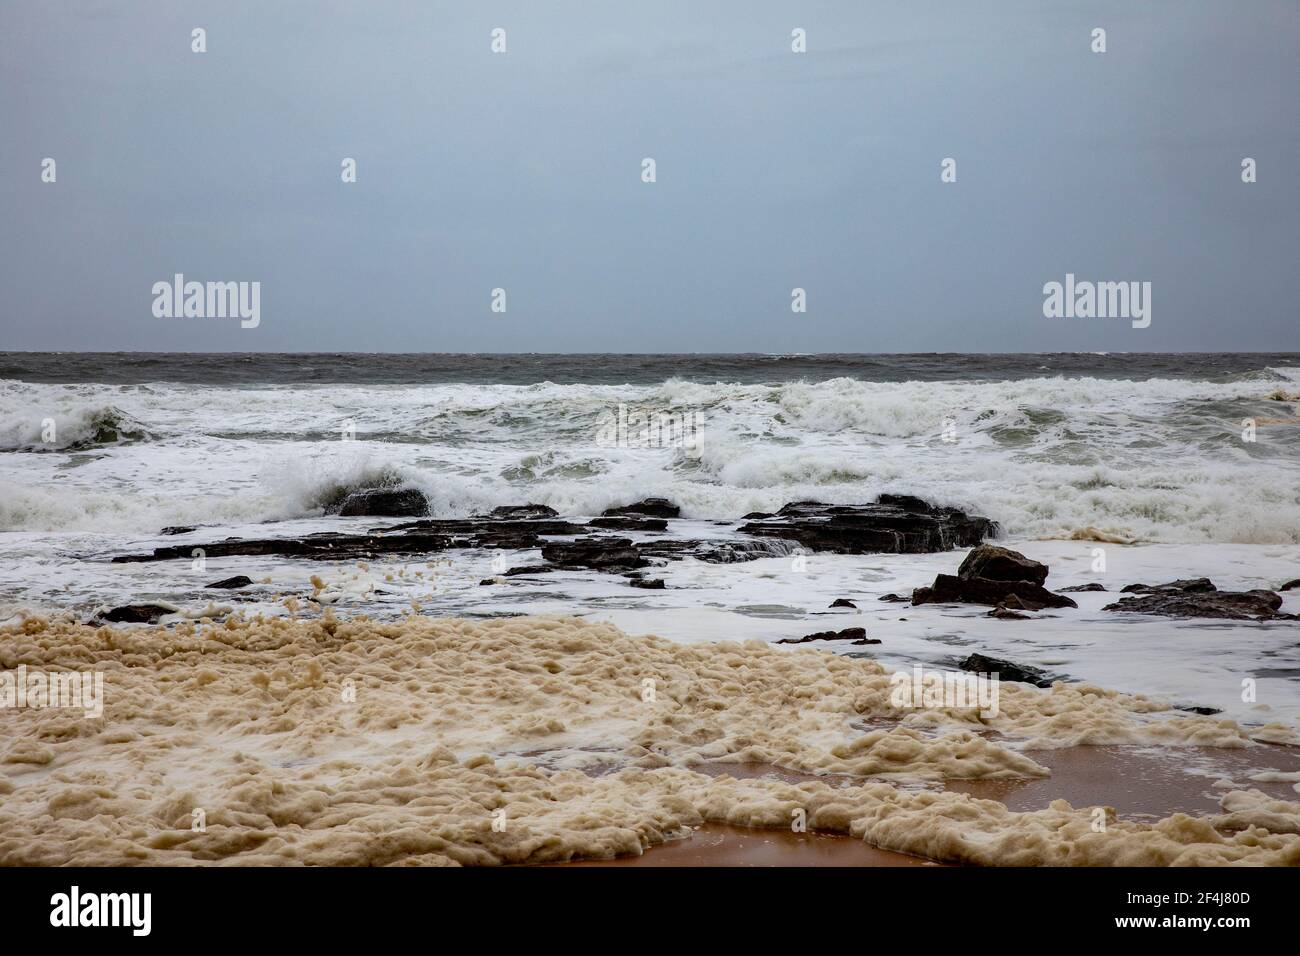 Sydney heavy storms and wild surf with sea foam on the beach during the New South Wales floods of march 2021,Australia Stock Photo